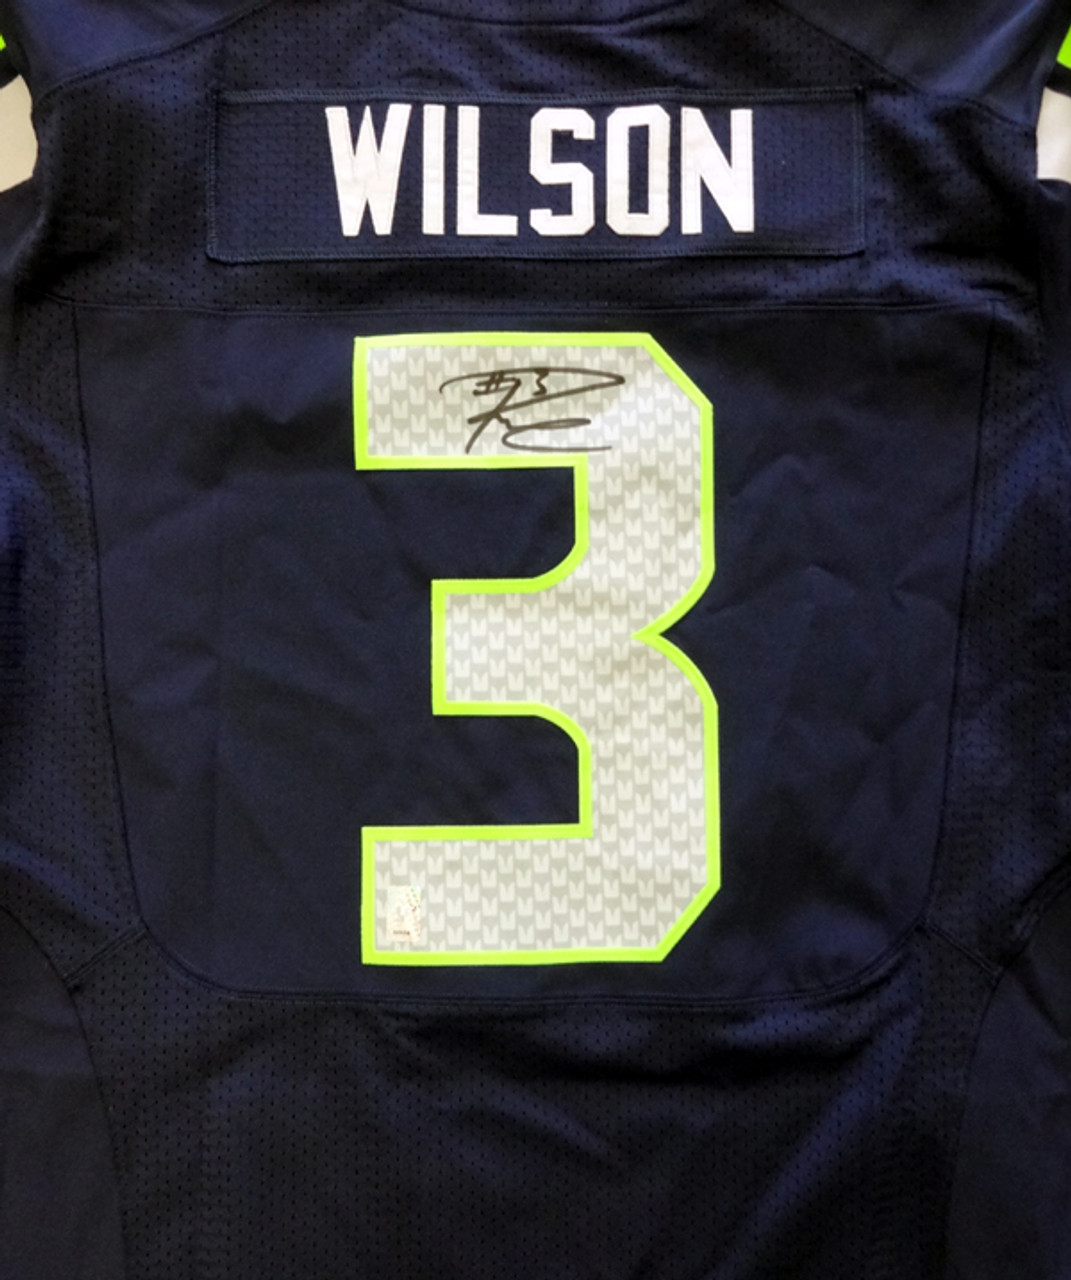 seahawks jersey coupon